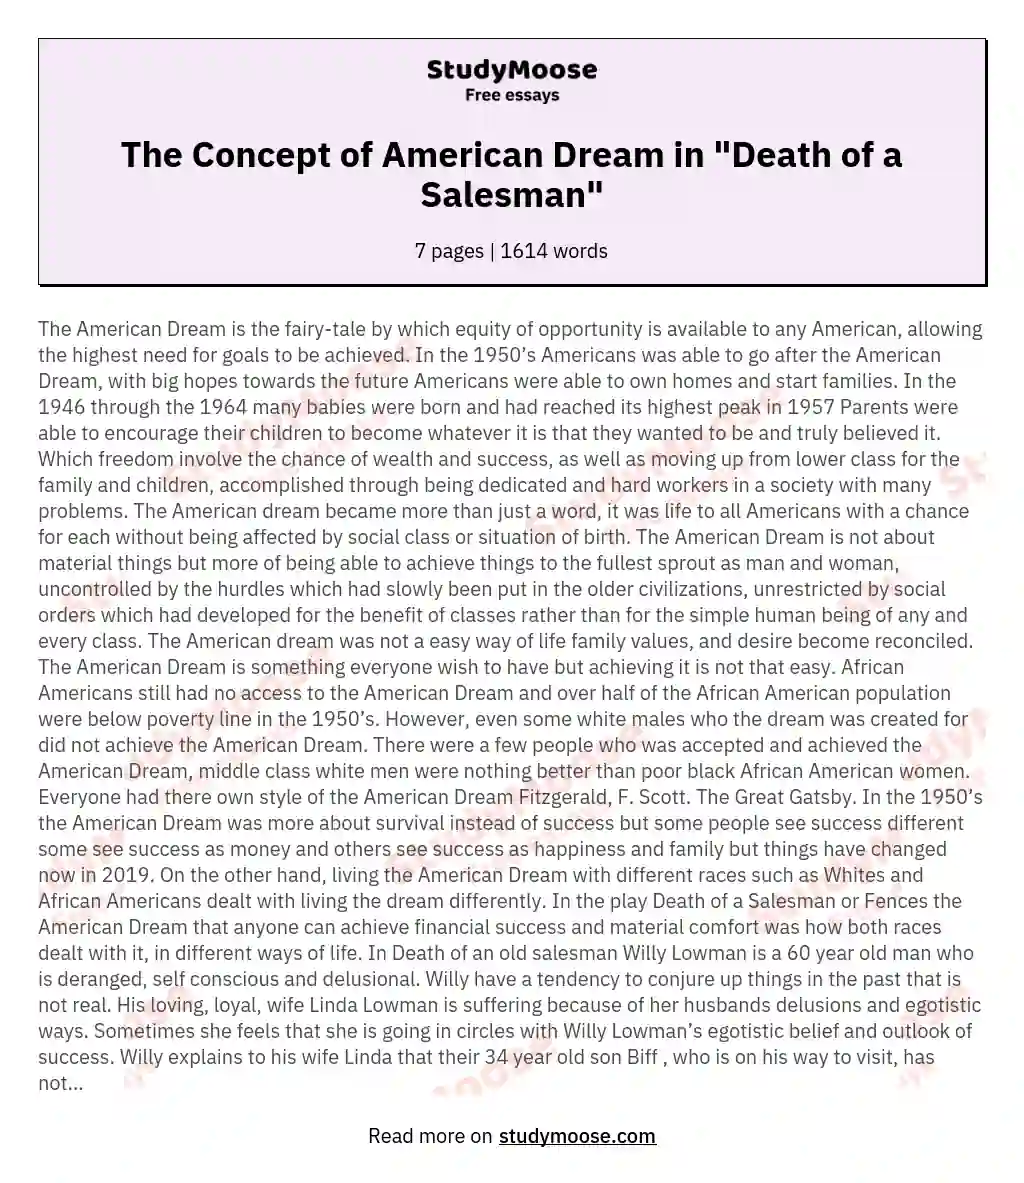 The Concept of American Dream in "Death of a Salesman" essay